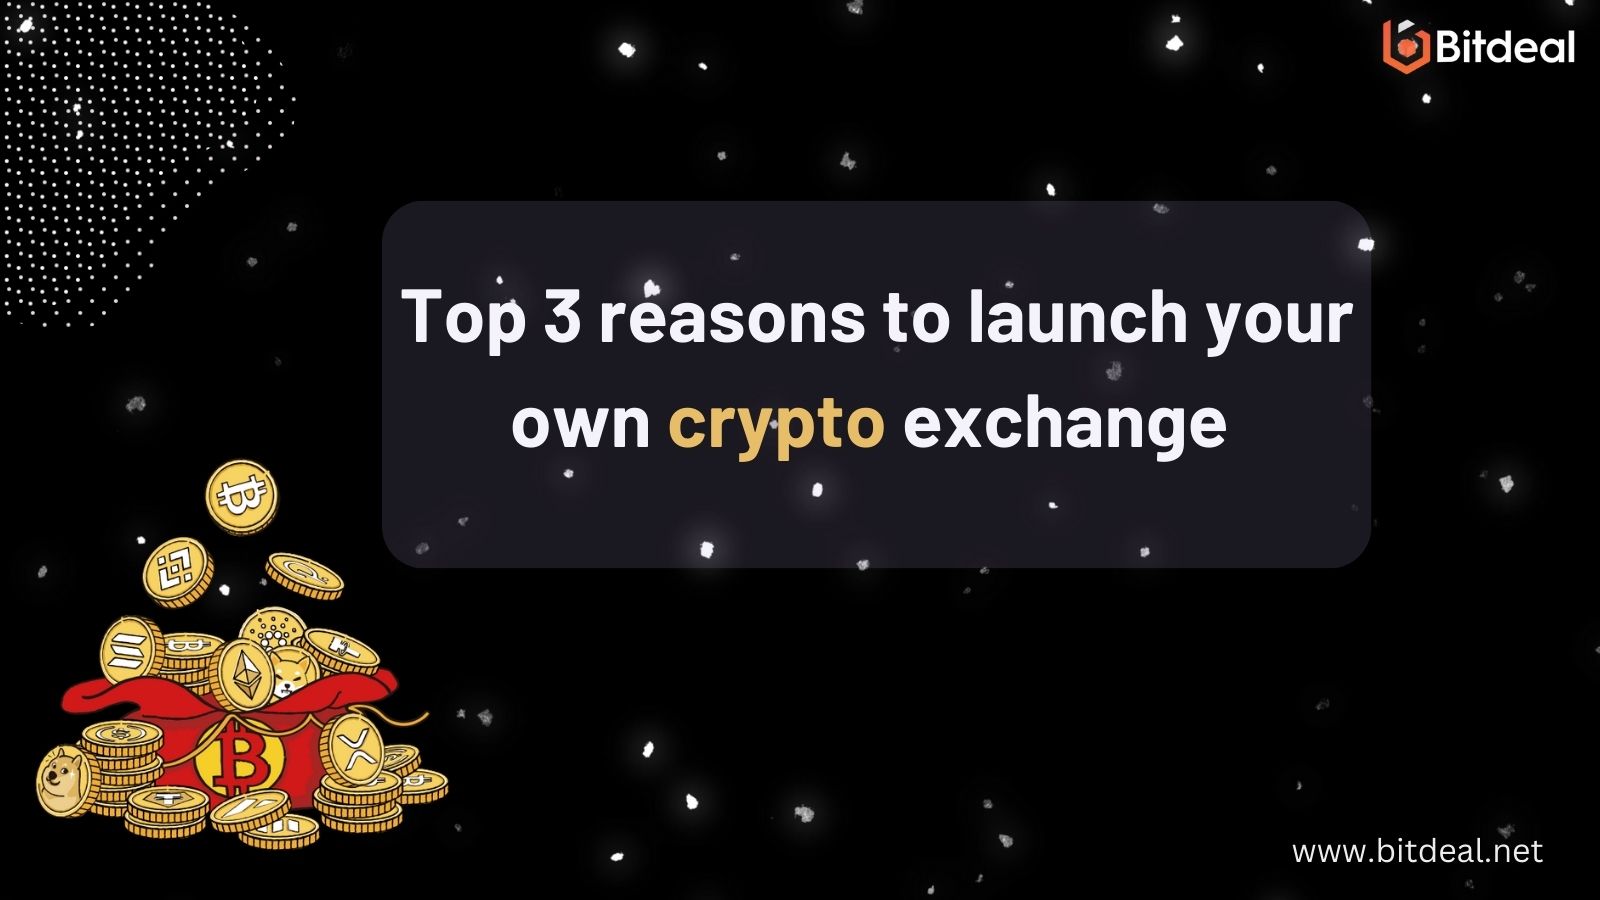 Top 3 reasons to launch your own crypto exchange